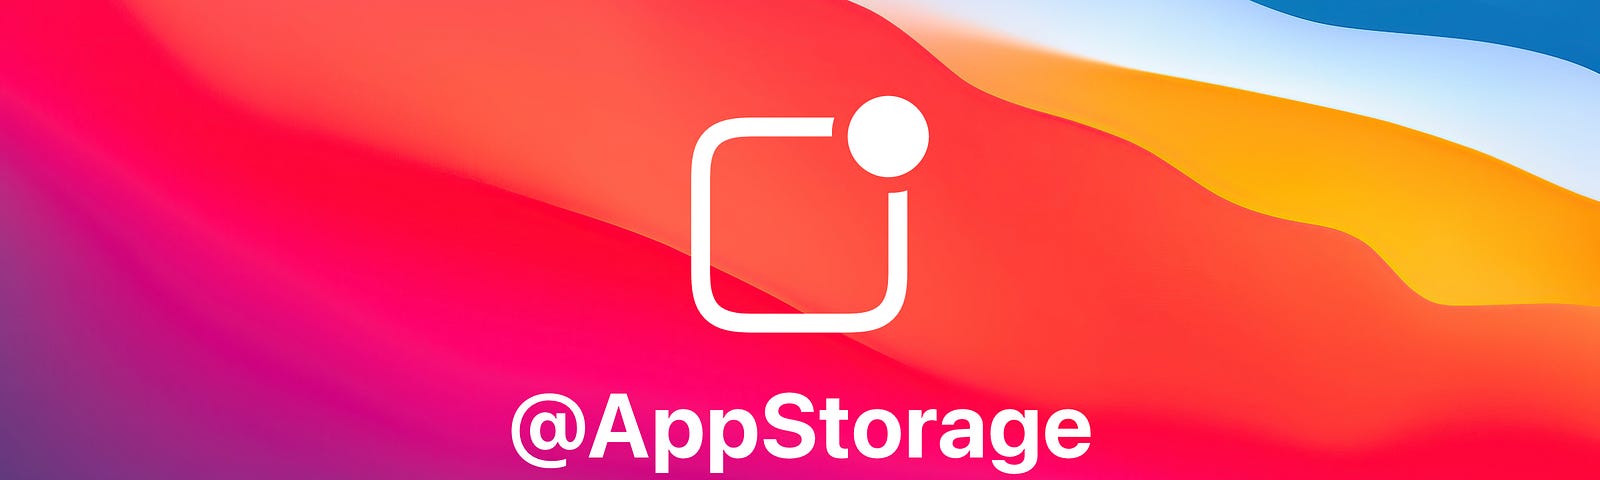 Everything you need to know about @AppStorage